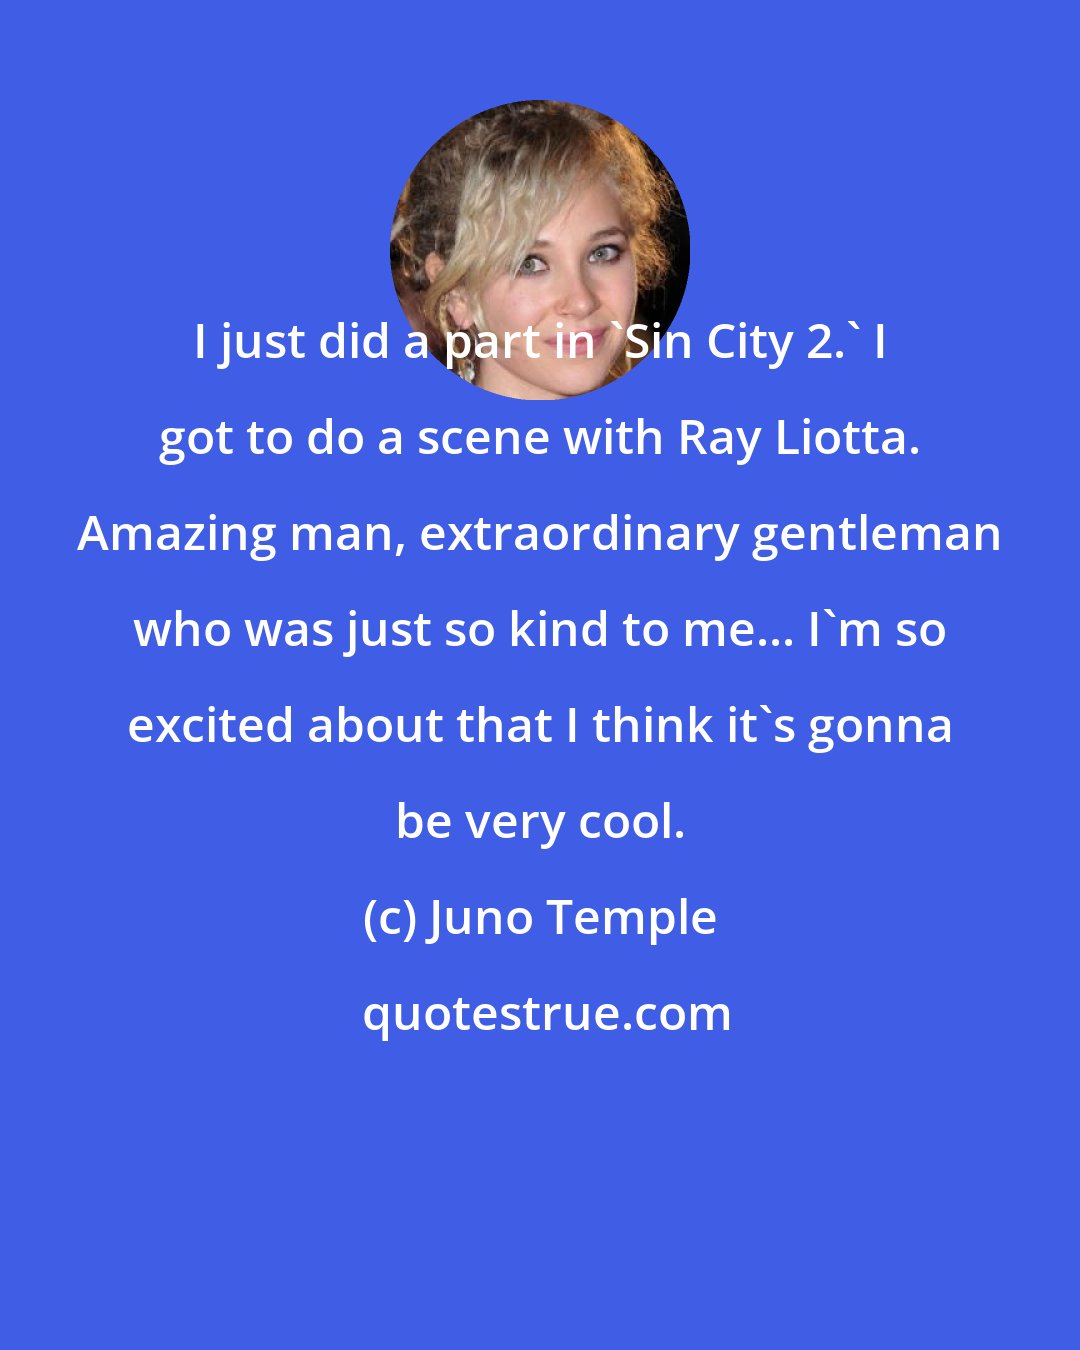 Juno Temple: I just did a part in 'Sin City 2.' I got to do a scene with Ray Liotta. Amazing man, extraordinary gentleman who was just so kind to me... I'm so excited about that I think it's gonna be very cool.